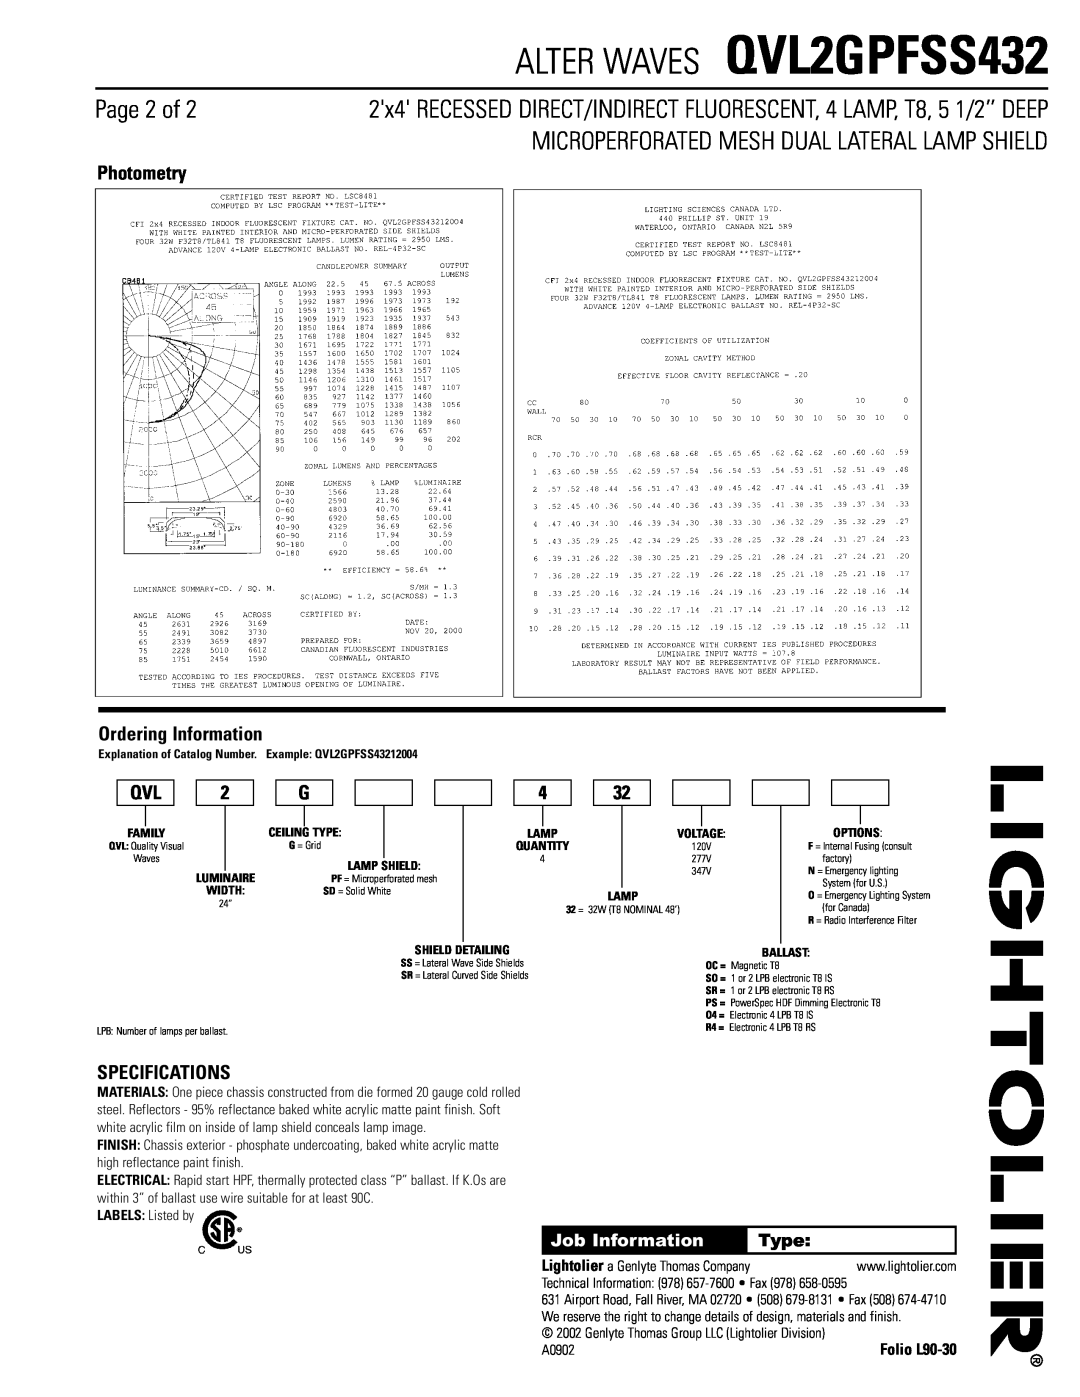 Lightolier Page 2 of, Photometry, Ordering Information, Specifications, ALTER WAVES QVL2GPFSS432, Job Information, Type 